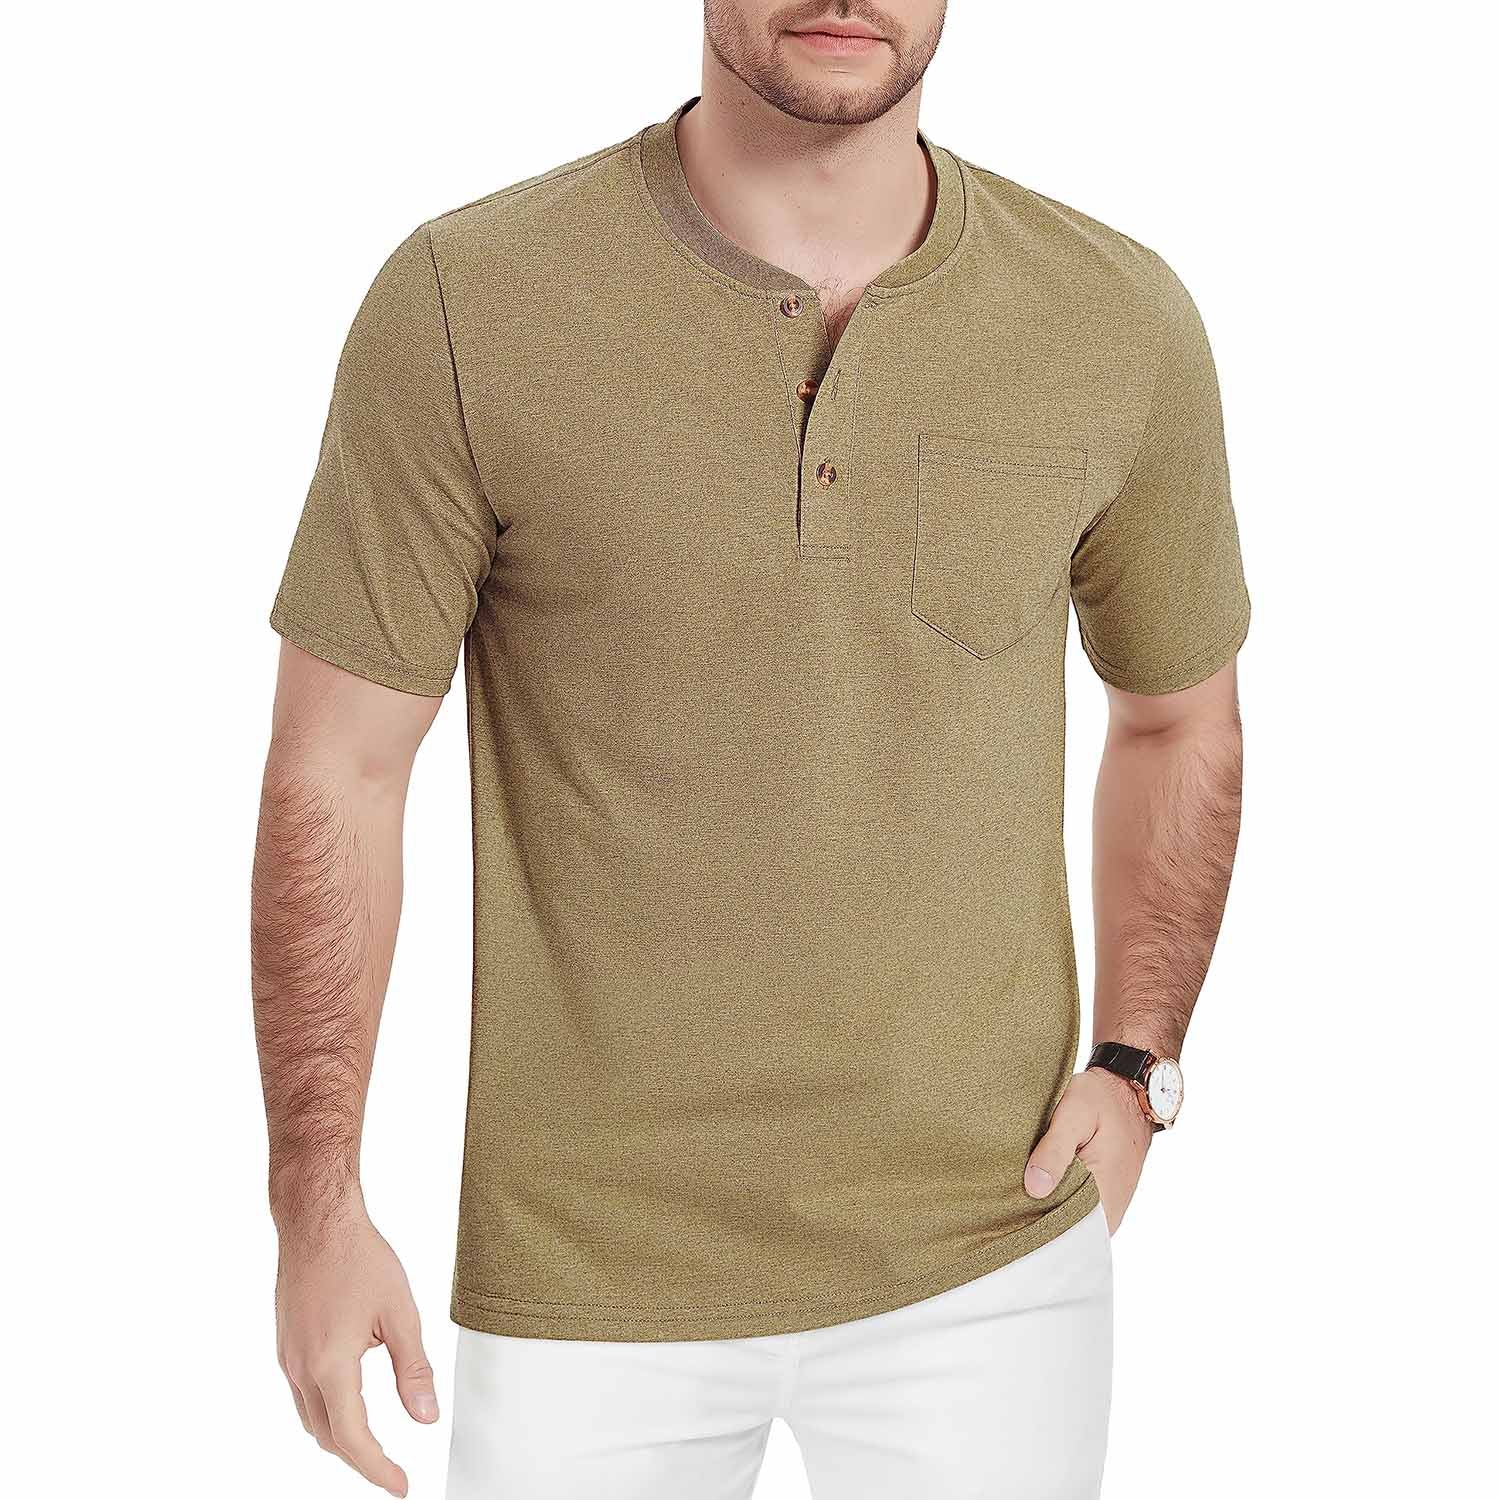 Men's Henley Shirts Short Sleeve Cotton Button Up Pocket Casual Front Placket Regular Fit Summer Daily Shirts